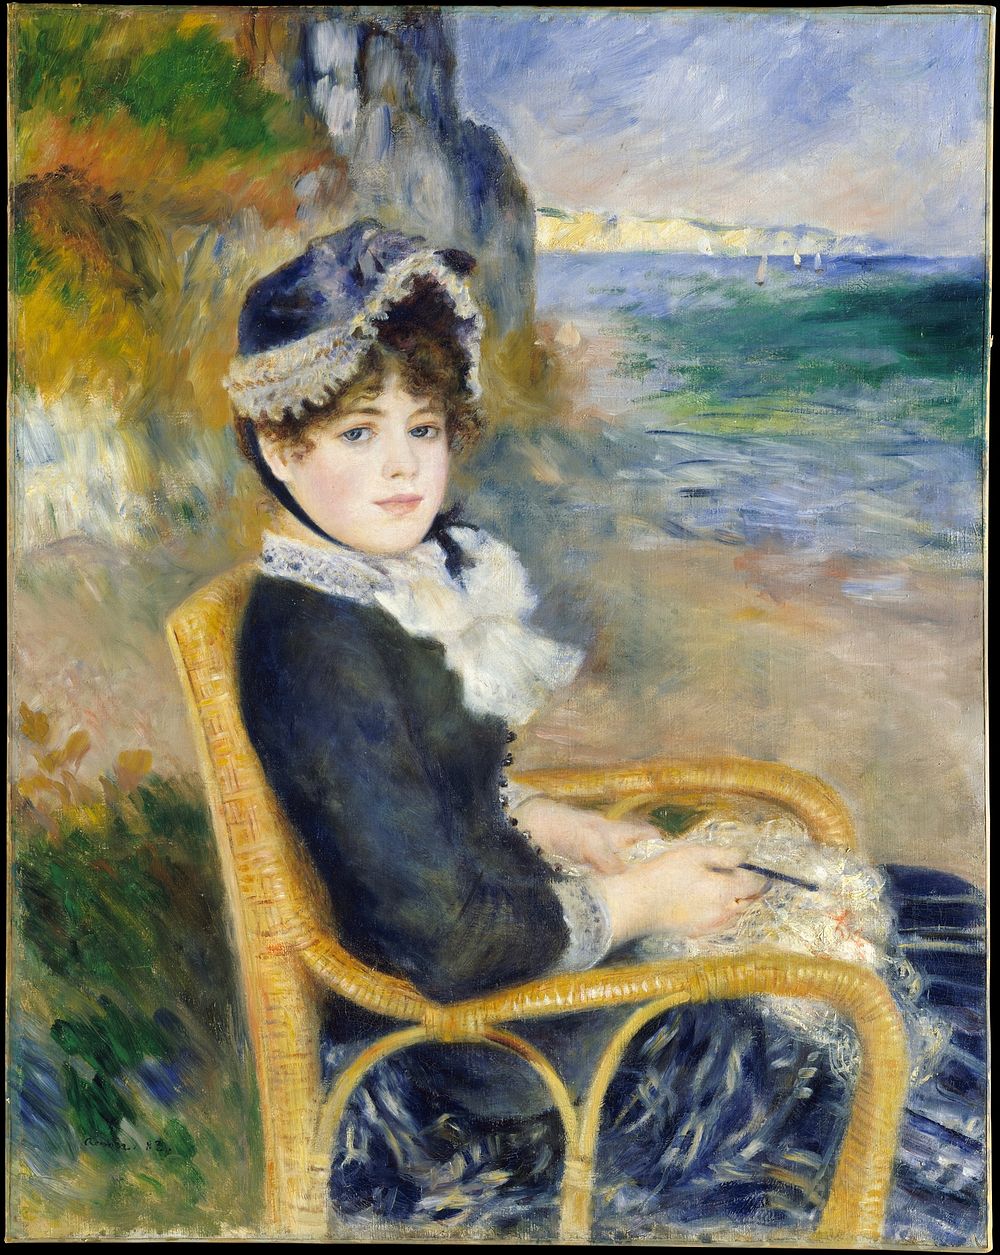 By the Seashore (1883) painting in high resolution by Pierre-Auguste Renoir.  